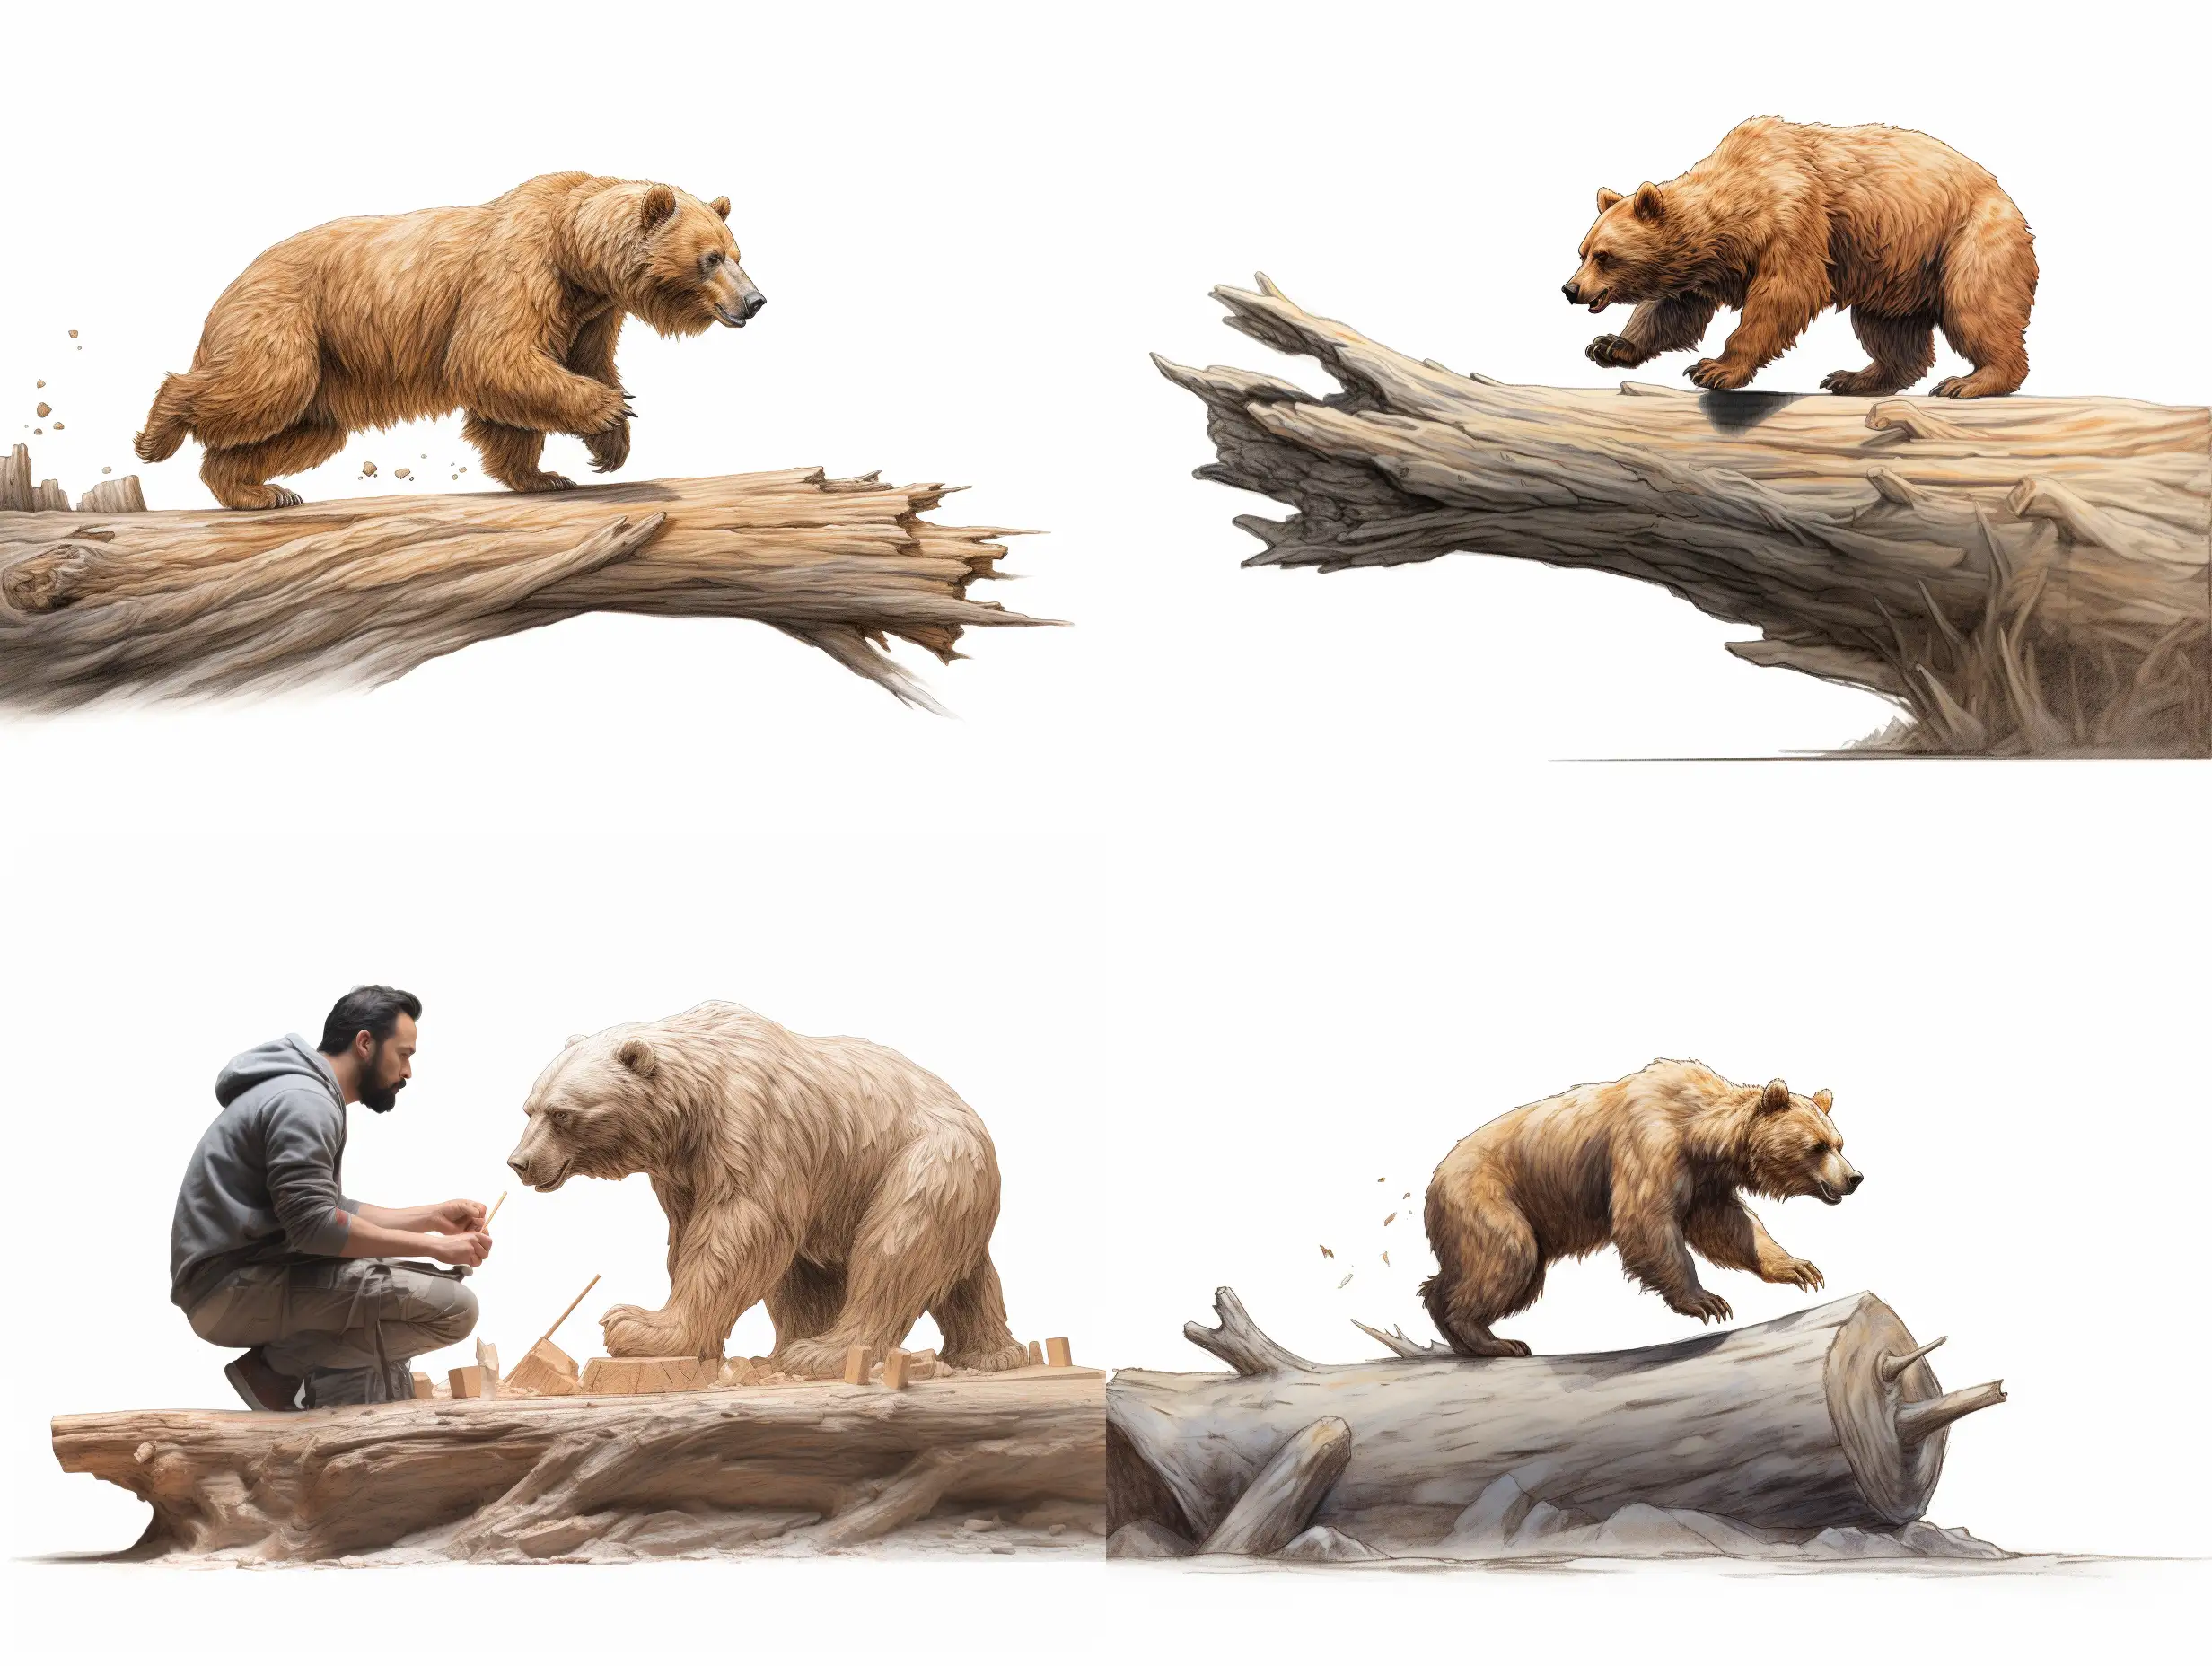 Dynamic-Brown-Bear-Wooden-Sculpture-Leaping-Over-Log-Professional-3D-Wood-Carving